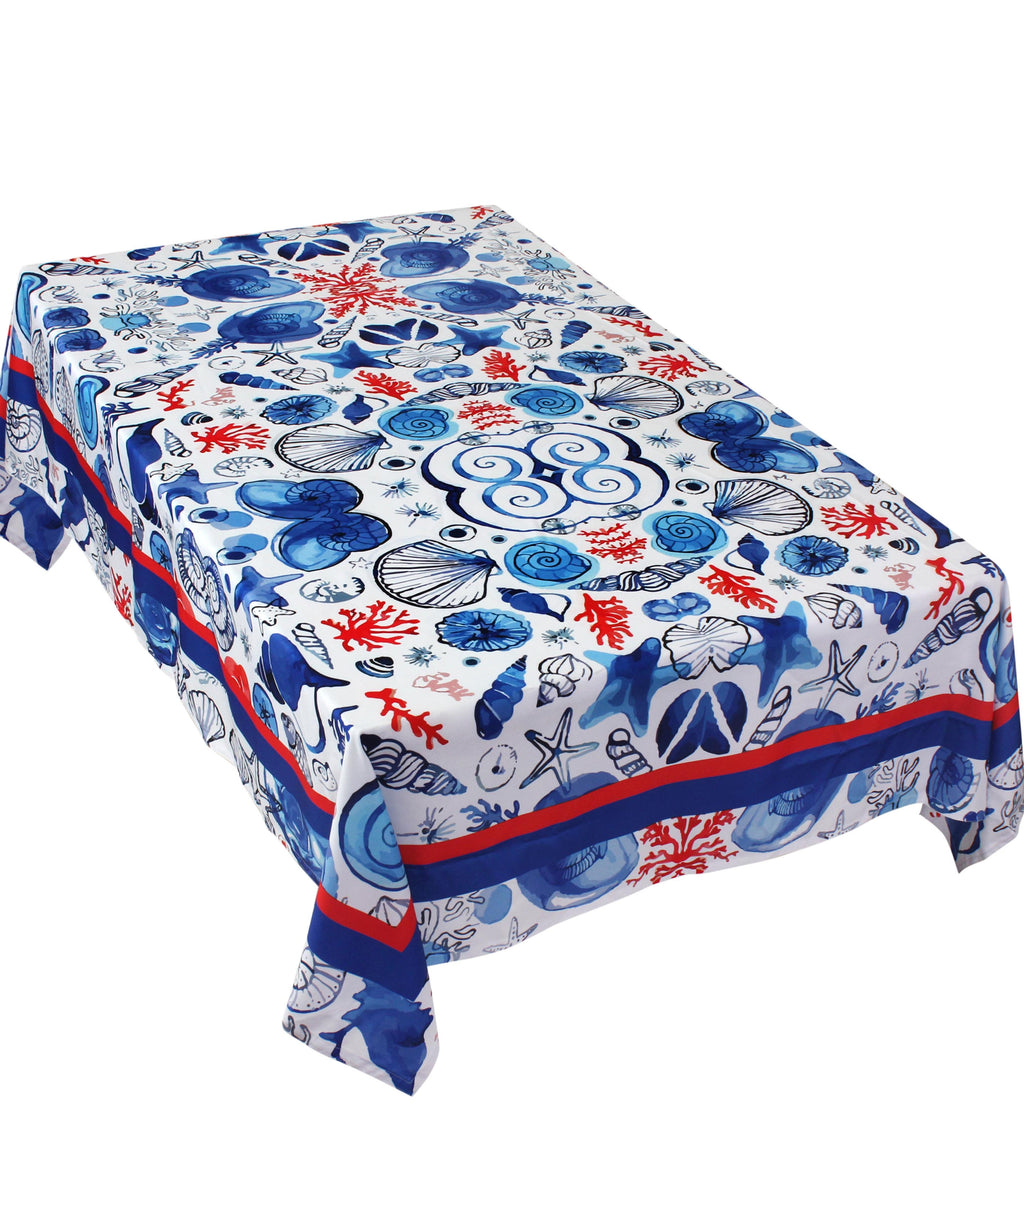 The Ocean Life Table Cover